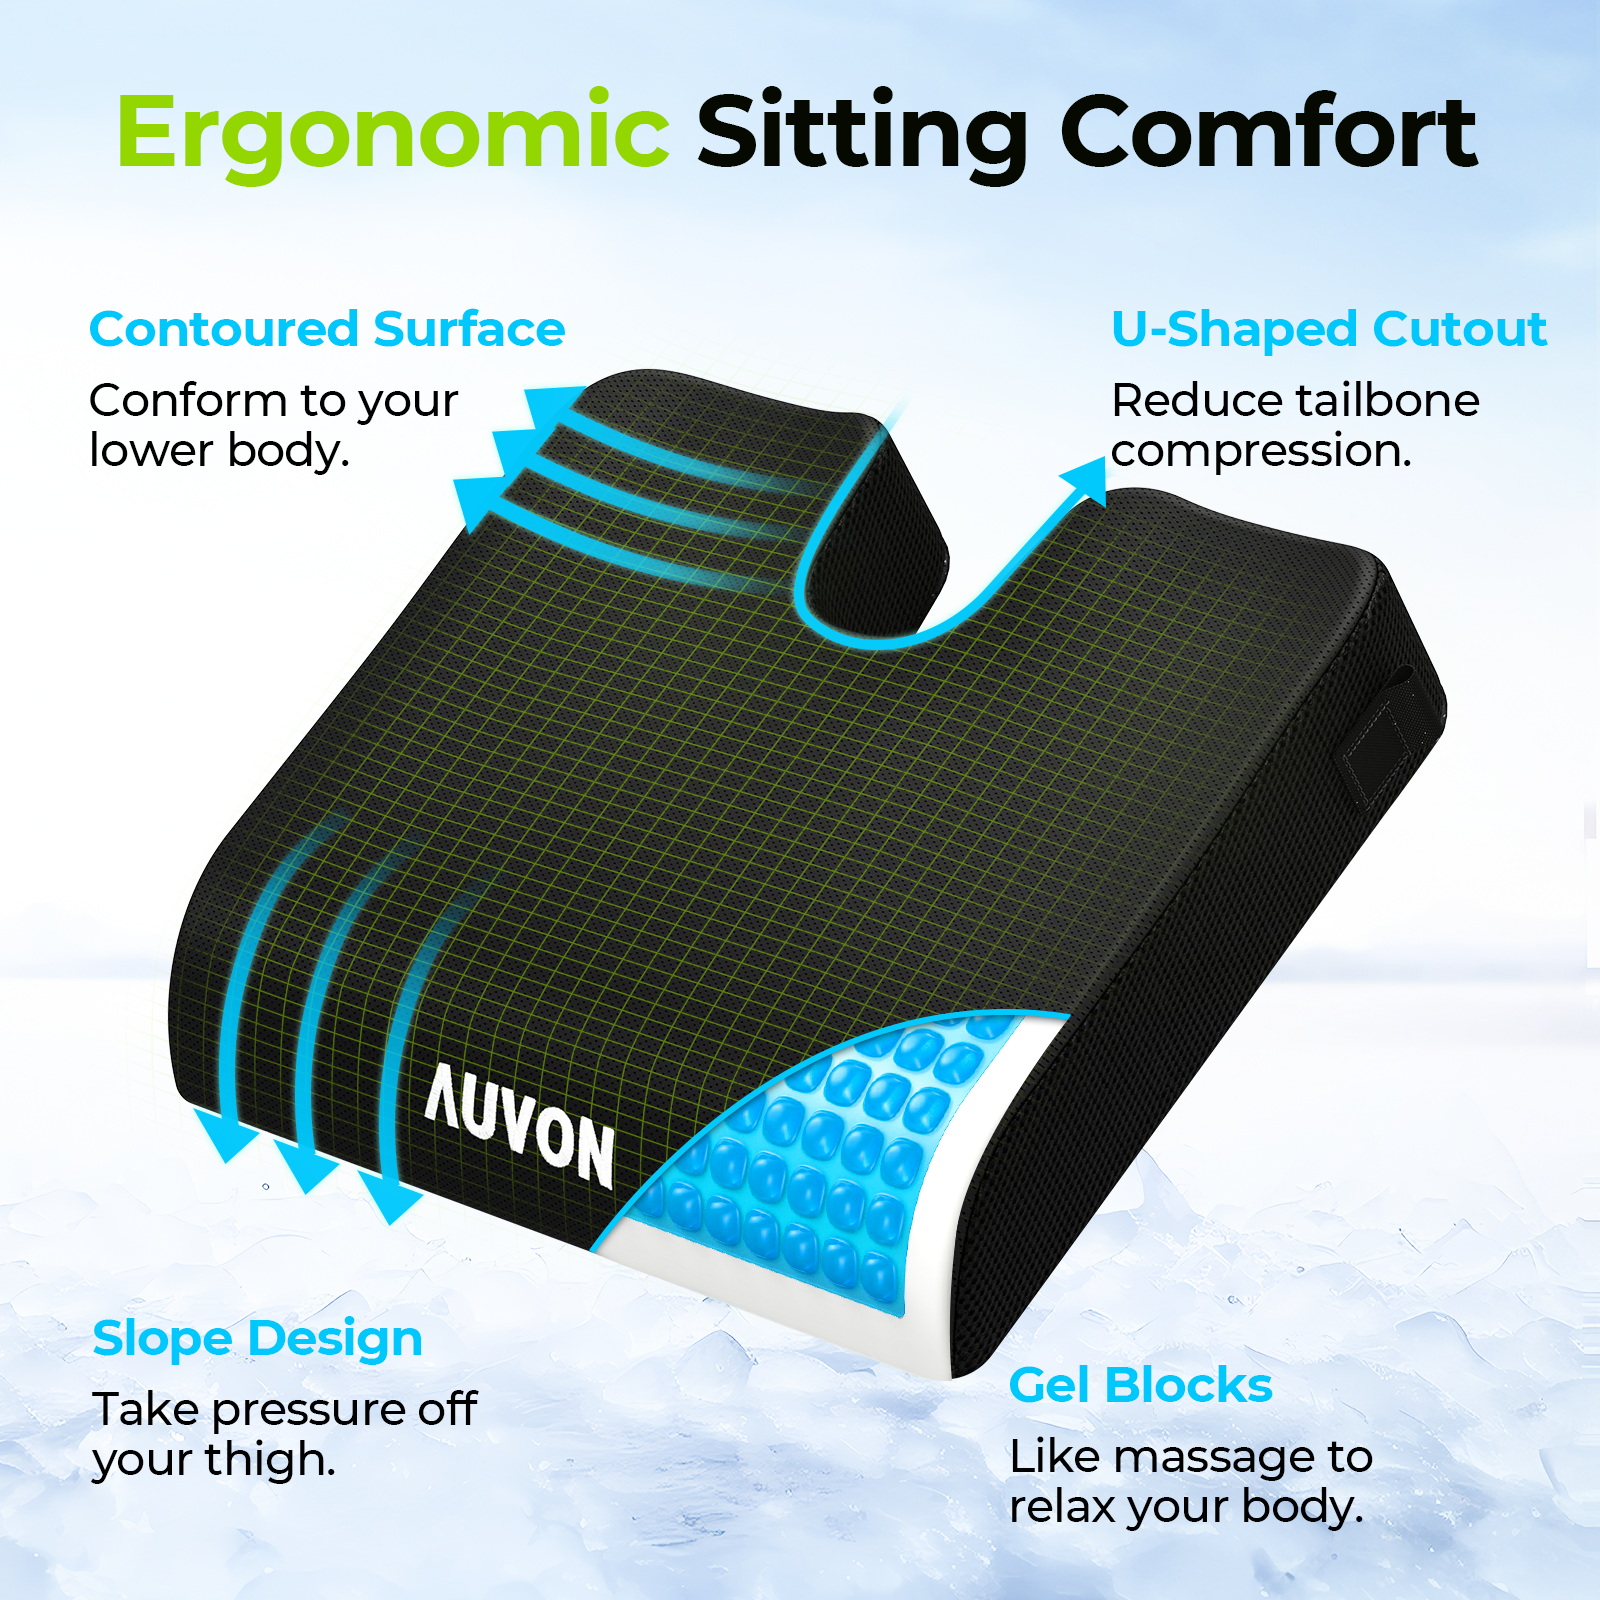 Super Large & Thick Gel Seat Cushion for Long Sitting Pressure Relief -  Non-Slip Gel Chair Cushion for Back, Sciatica, Tailbone Pain Relief - Seat